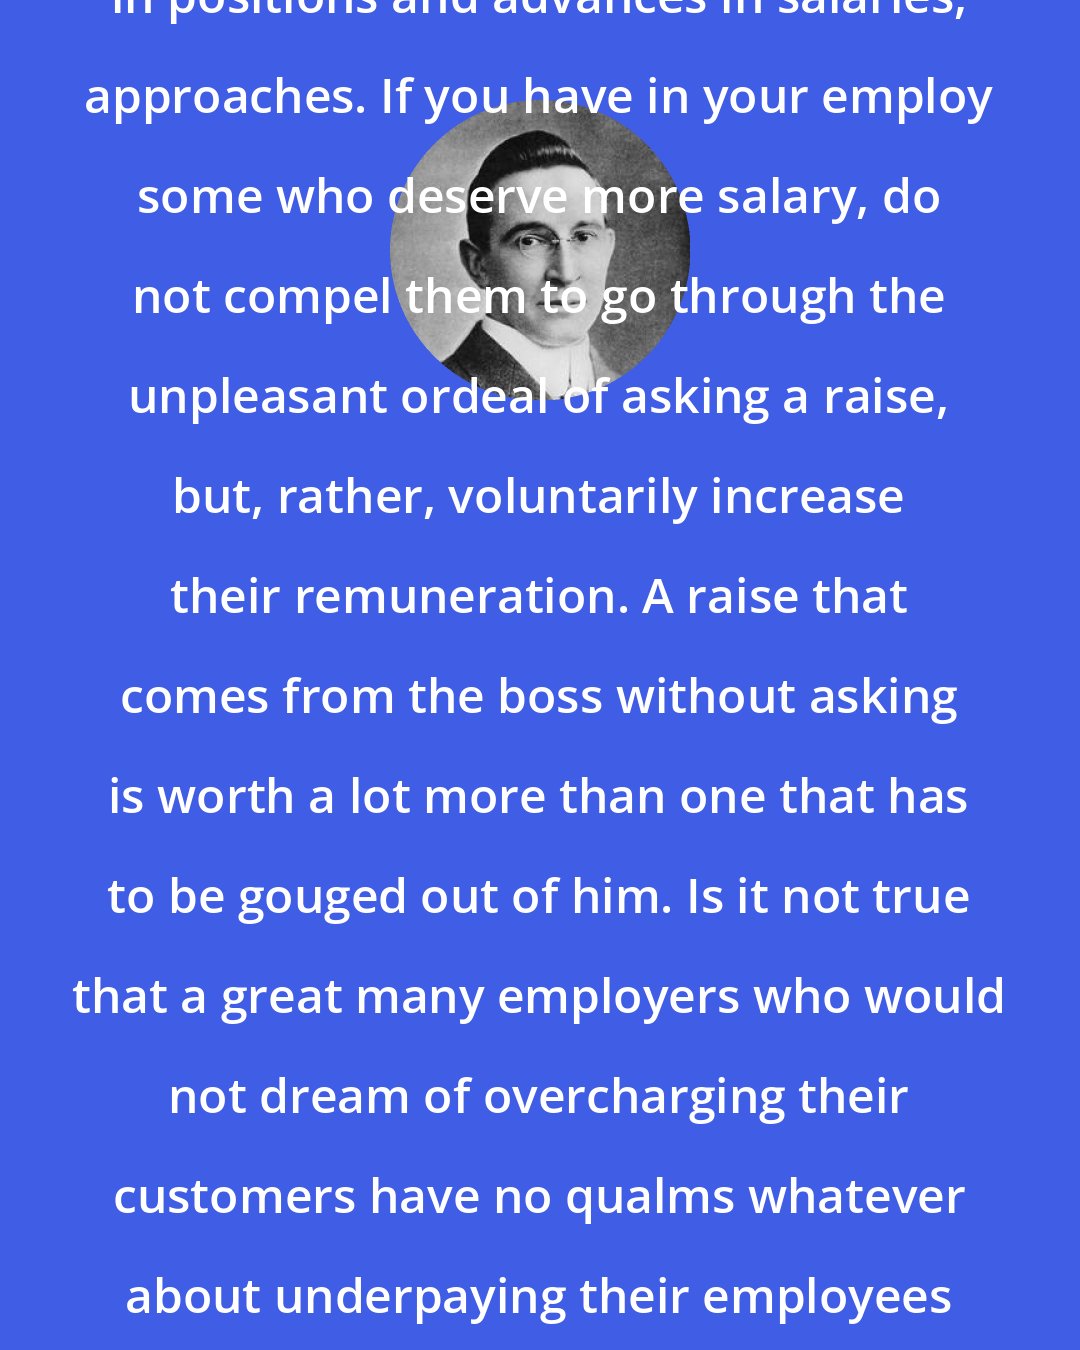 B. C. Forbes: New Year, the season for changes in positions and advances in salaries, approaches. If you have in your employ some who deserve more salary, do not compel them to go through the unpleasant ordeal of asking a raise, but, rather, voluntarily increase their remuneration. A raise that comes from the boss without asking is worth a lot more than one that has to be gouged out of him. Is it not true that a great many employers who would not dream of overcharging their customers have no qualms whatever about underpaying their employees if the latter will submit without protest?